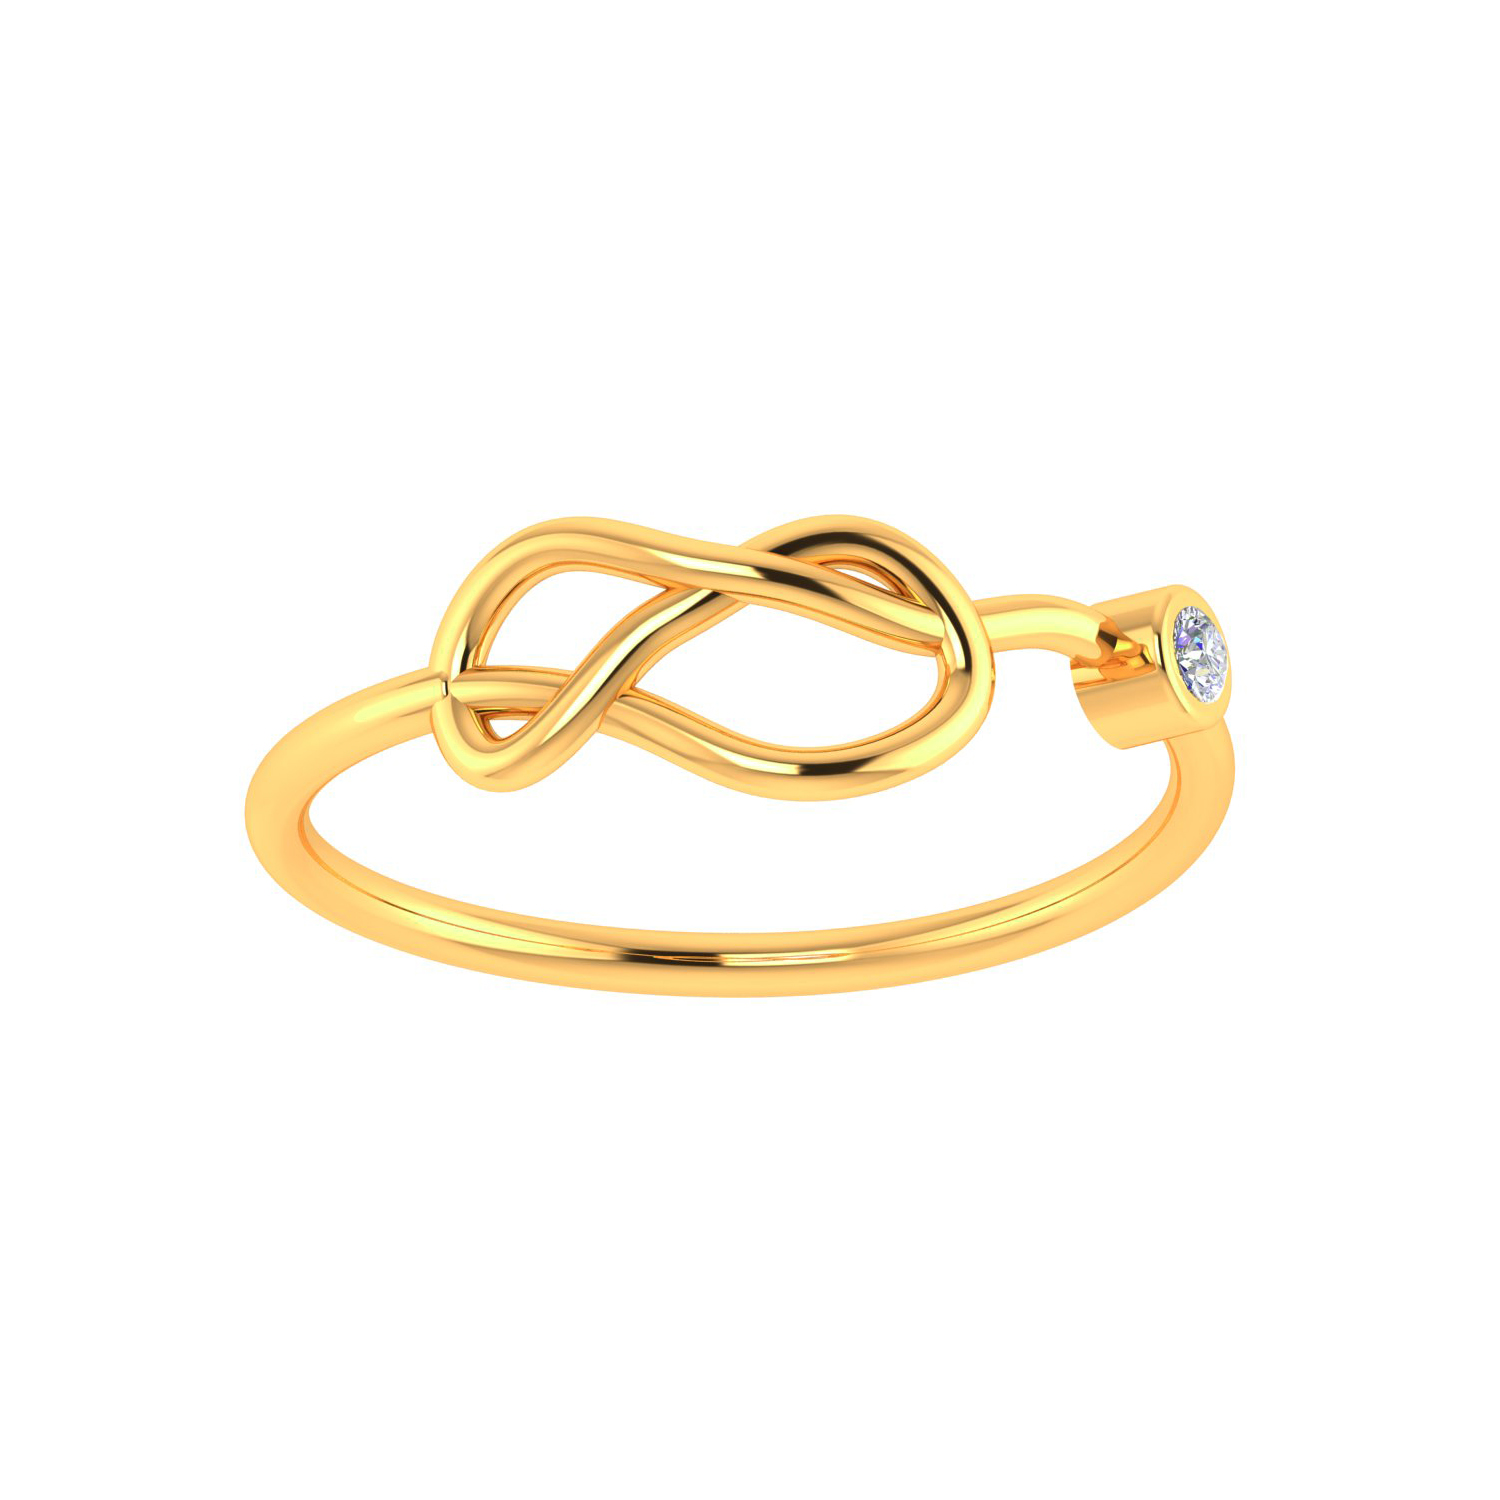 Solid Gold Knot Style Diamond Ring